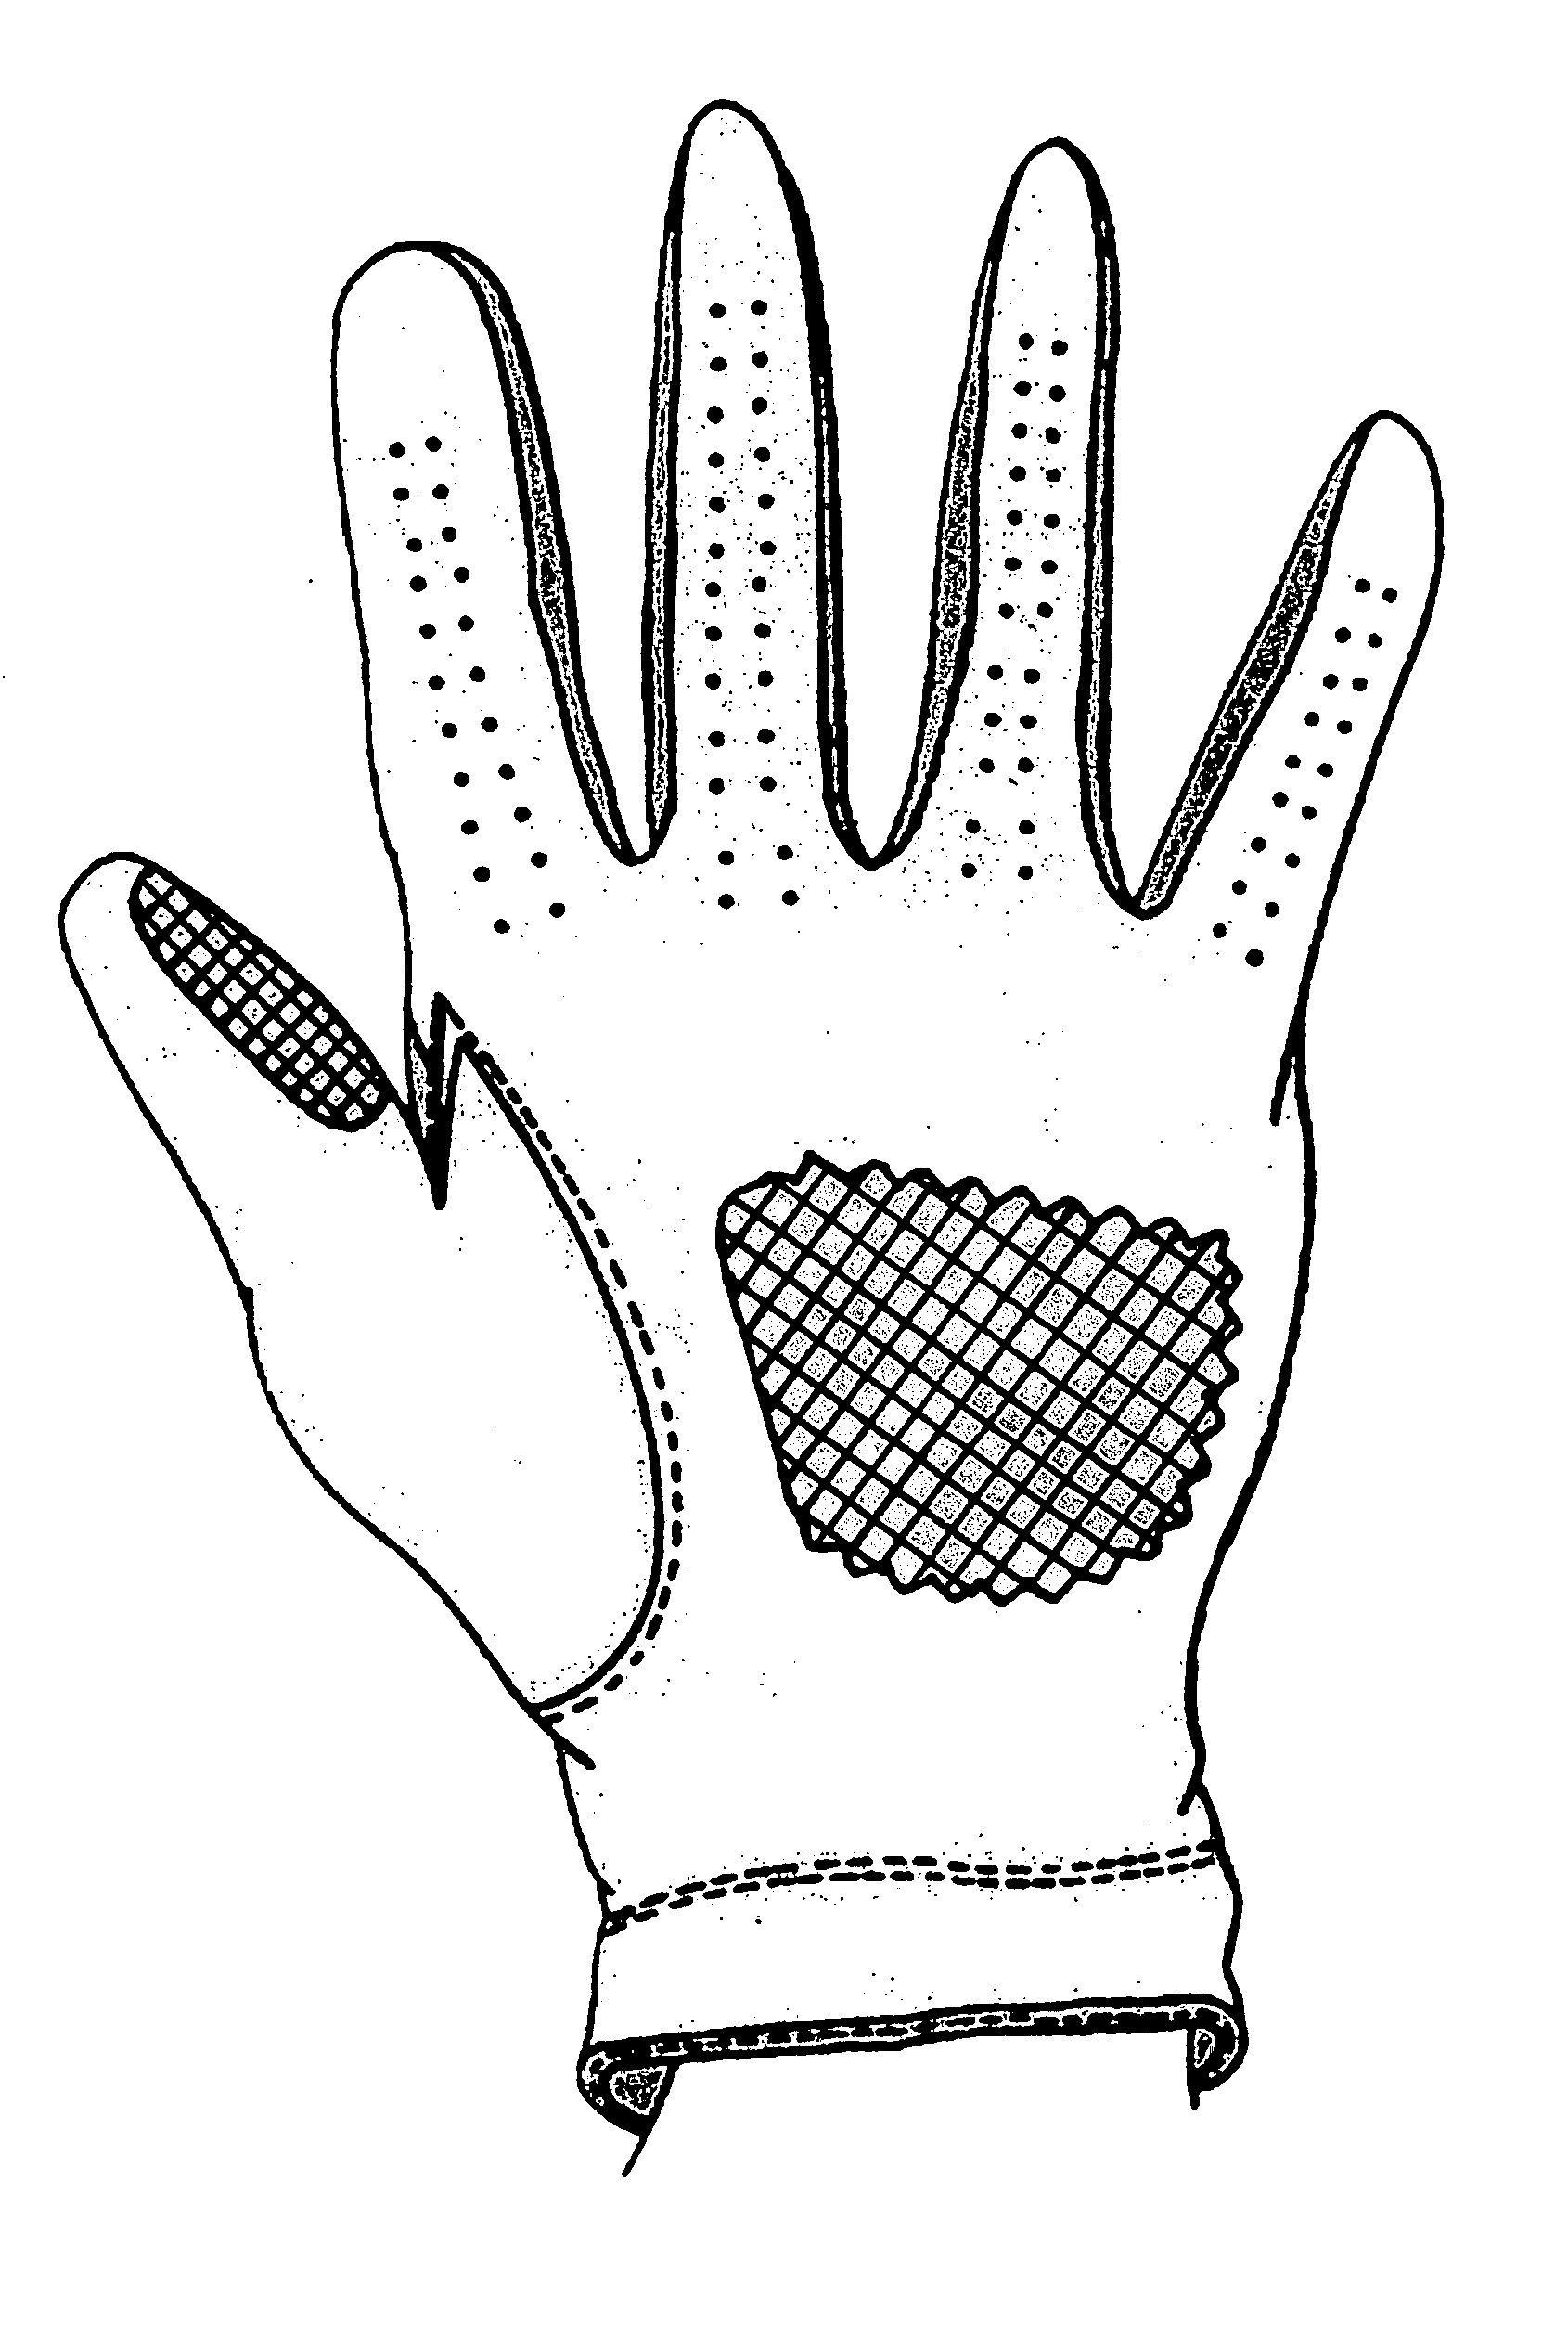 Golf glove and replaceable saving pads